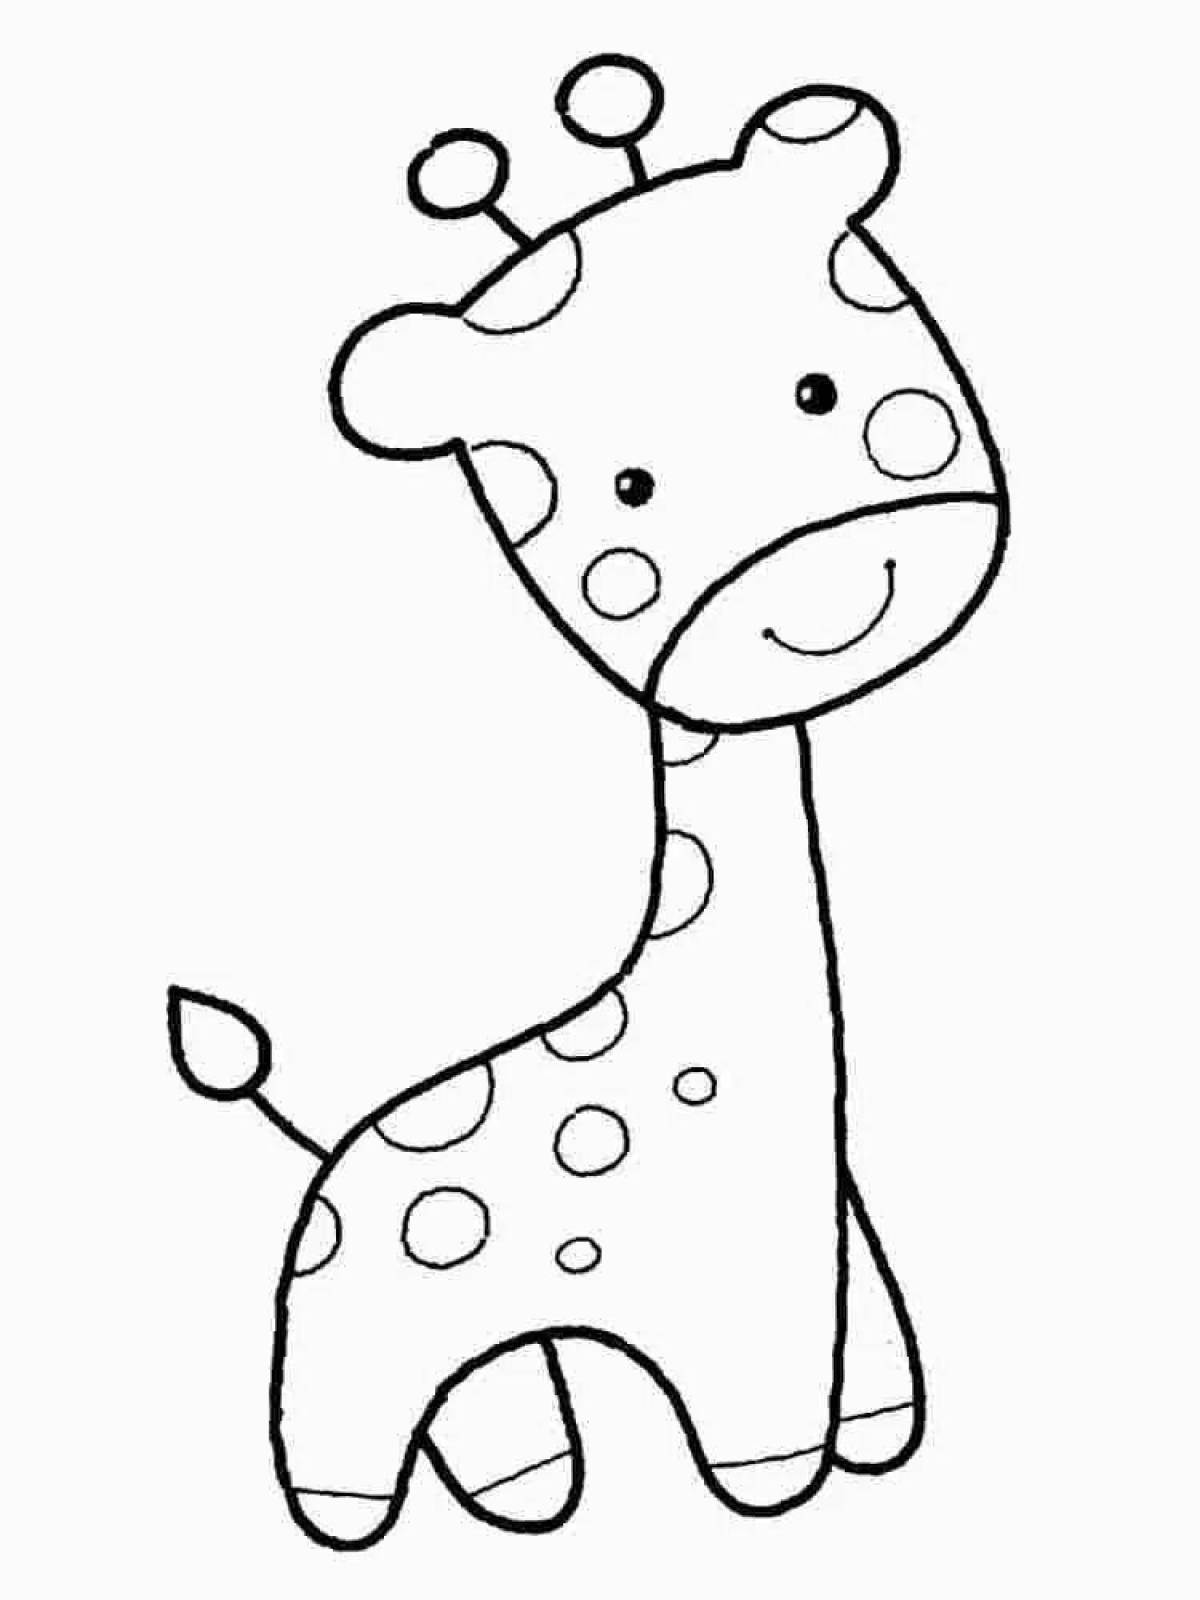 Glittering Giraffe Coloring Page for Toddlers